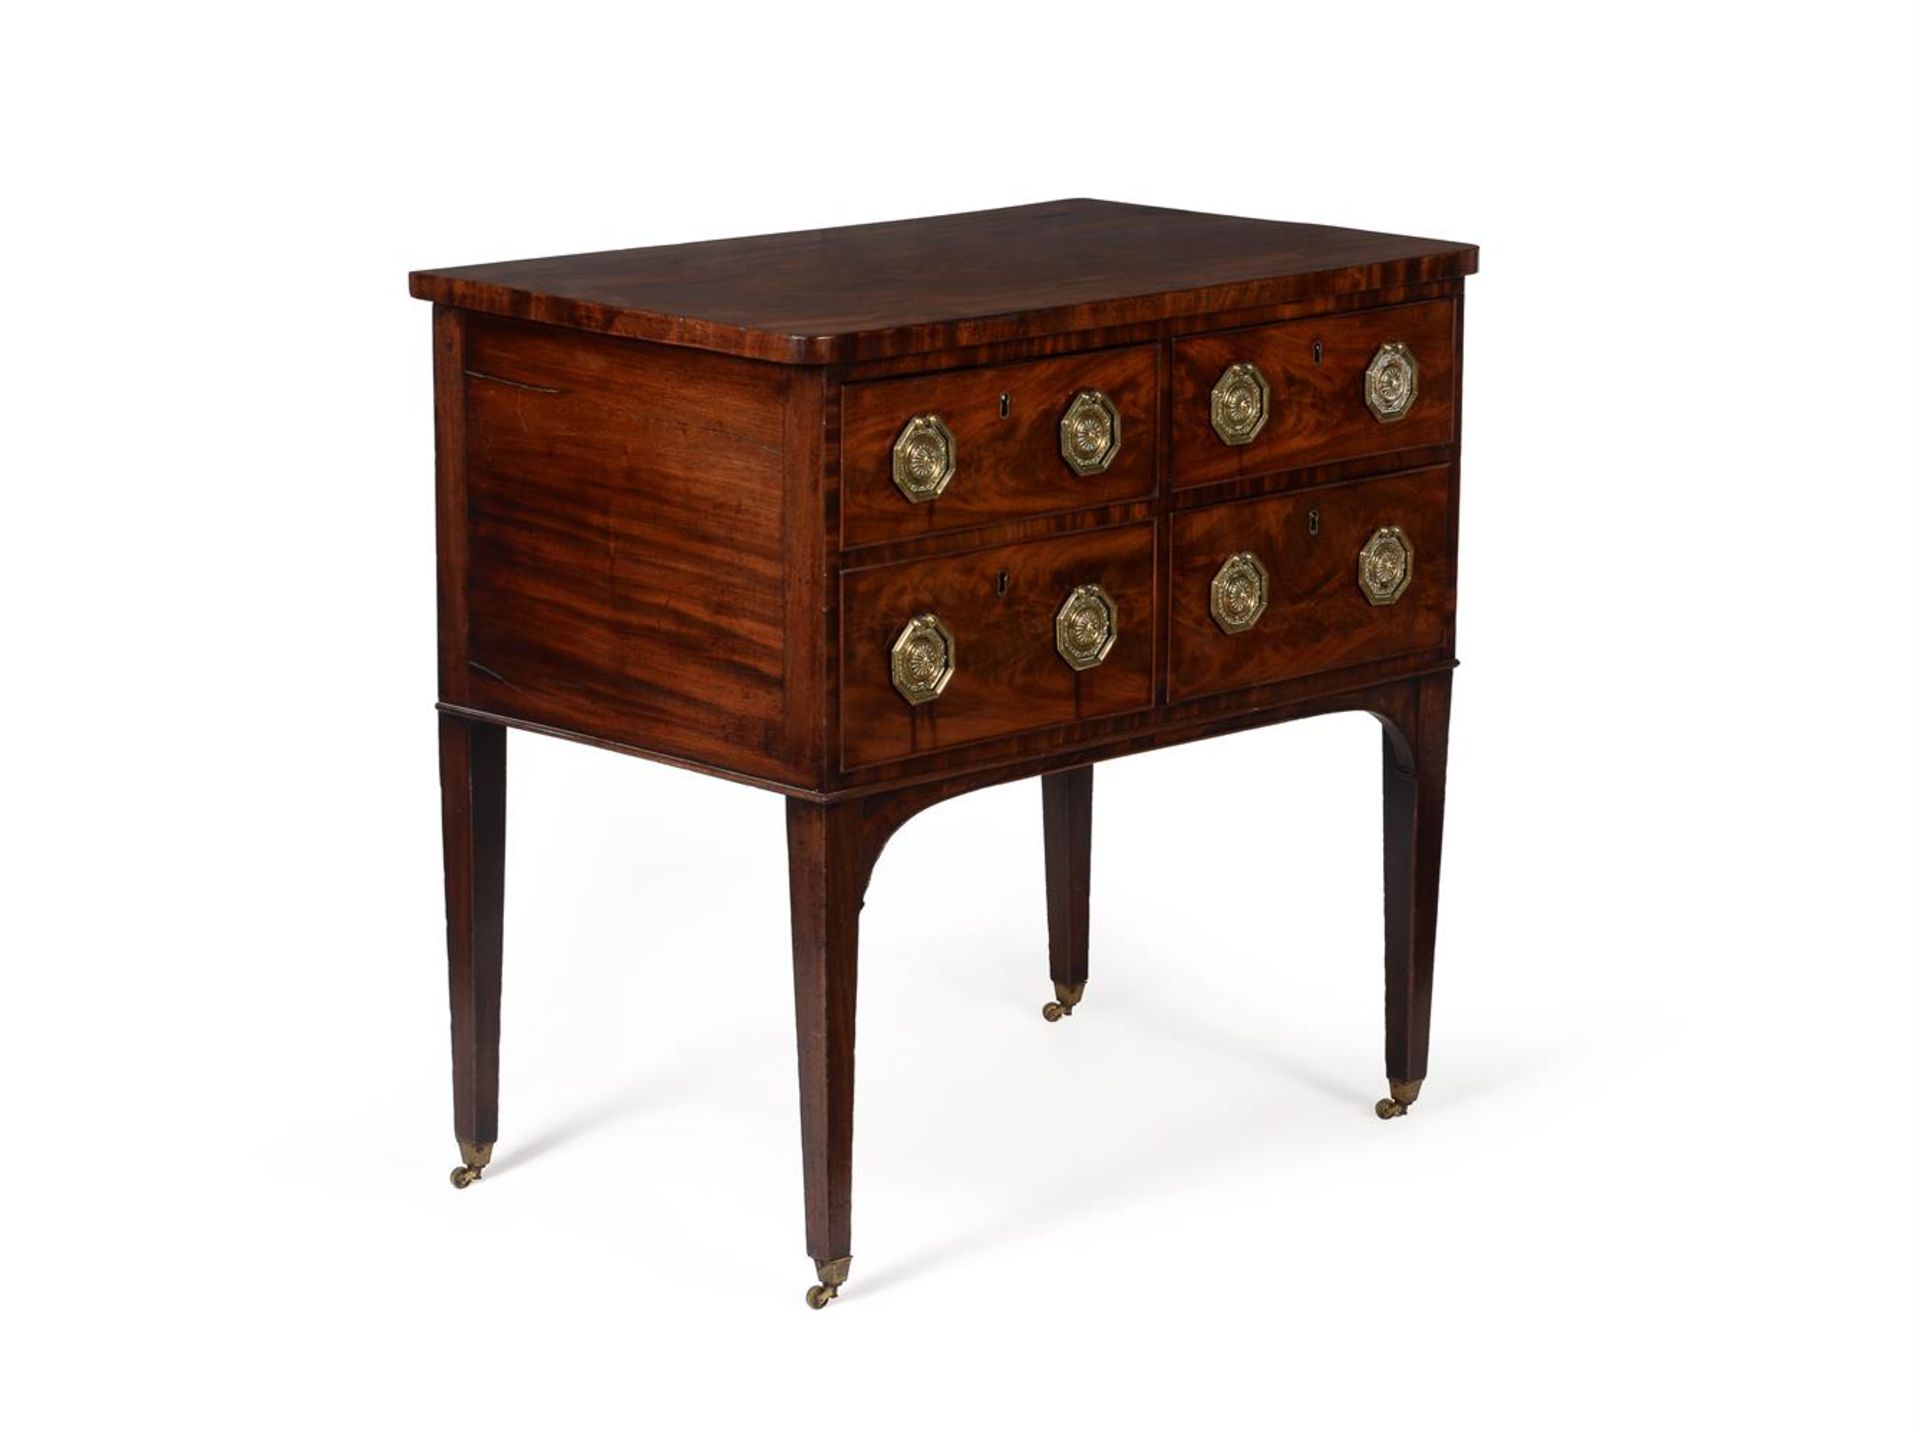 AN UNUSUAL GEORGE III MAHOGANY CHEST OF DRAWERS, CIRCA 1790 - Image 2 of 5